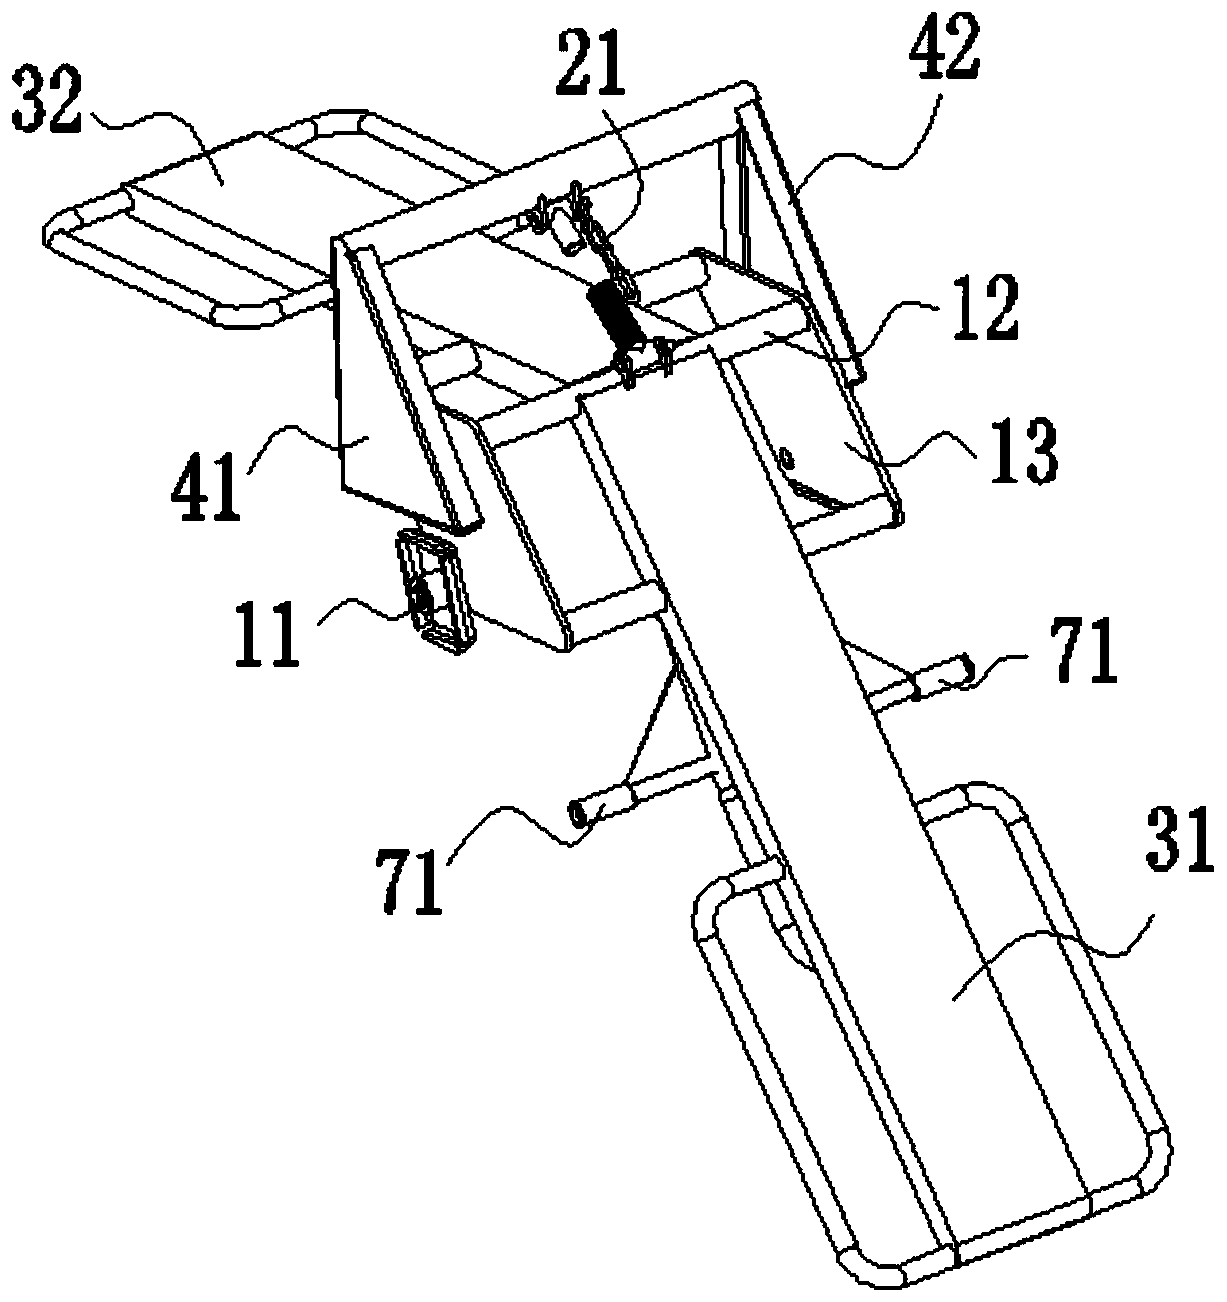 Control door for channel for pig to enter and exit for individual feeding and feeding device